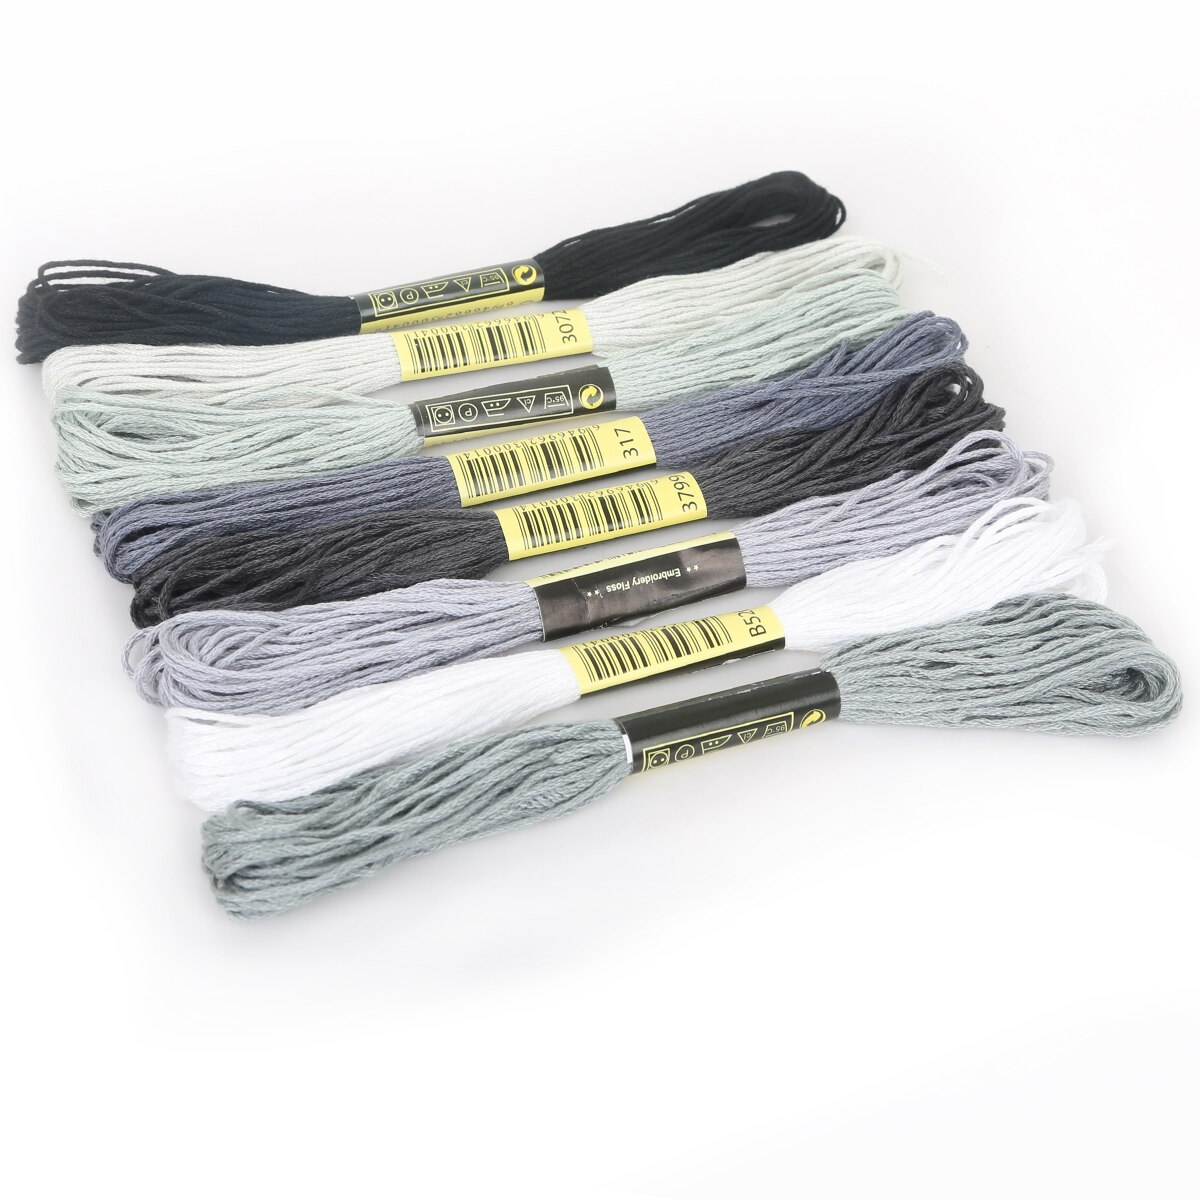 8pcs 7.5m Multiple Color Thread Cross Stitch Cotton Sewing Skeins Craft Embroidery Thread Floss Kit DIY Sewing Tools Accessories: Grey